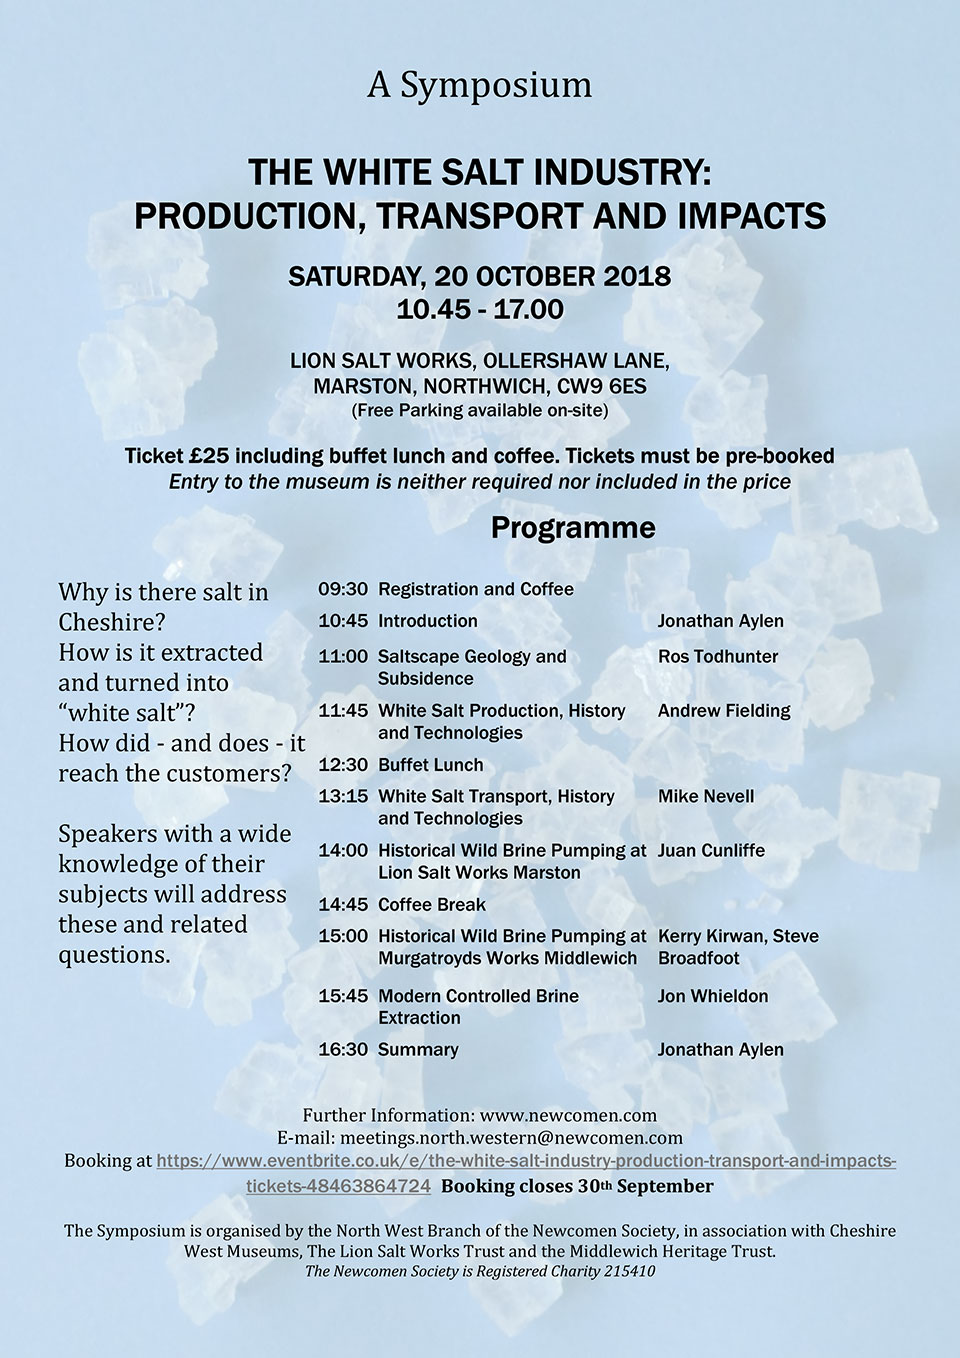 Event Flyer for The White Salt Industry Symposium